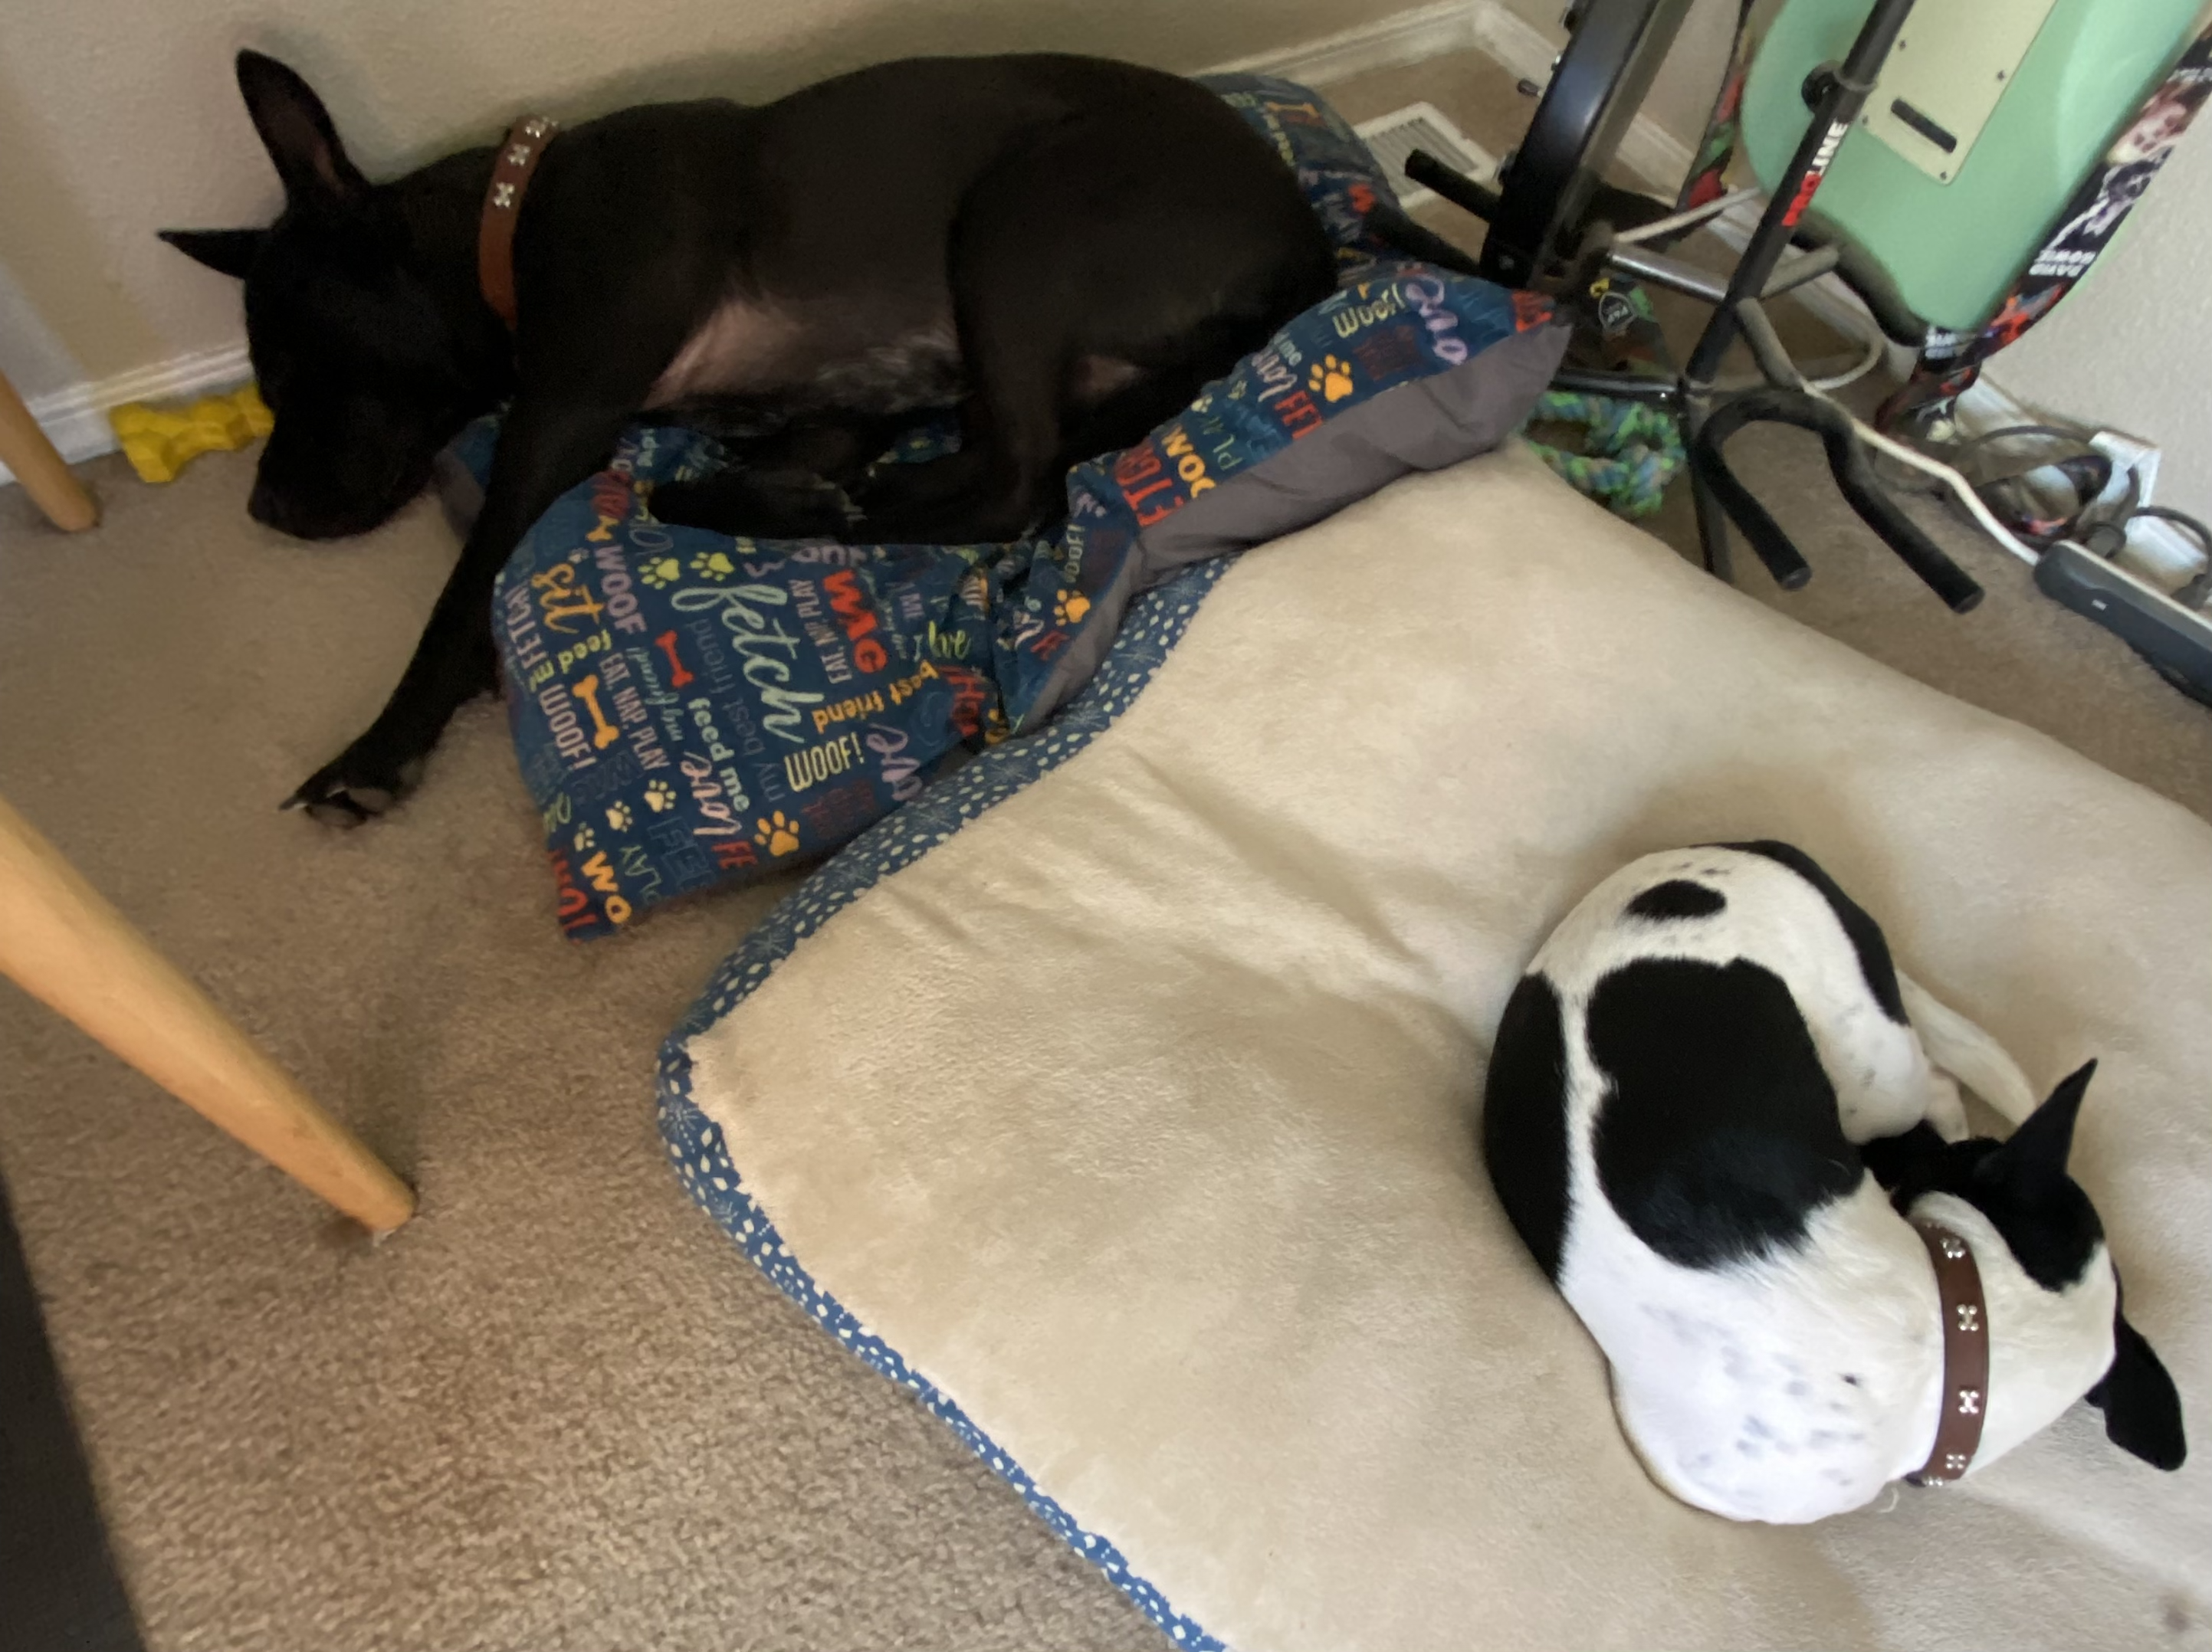 Two dogs sleeping on dog beds